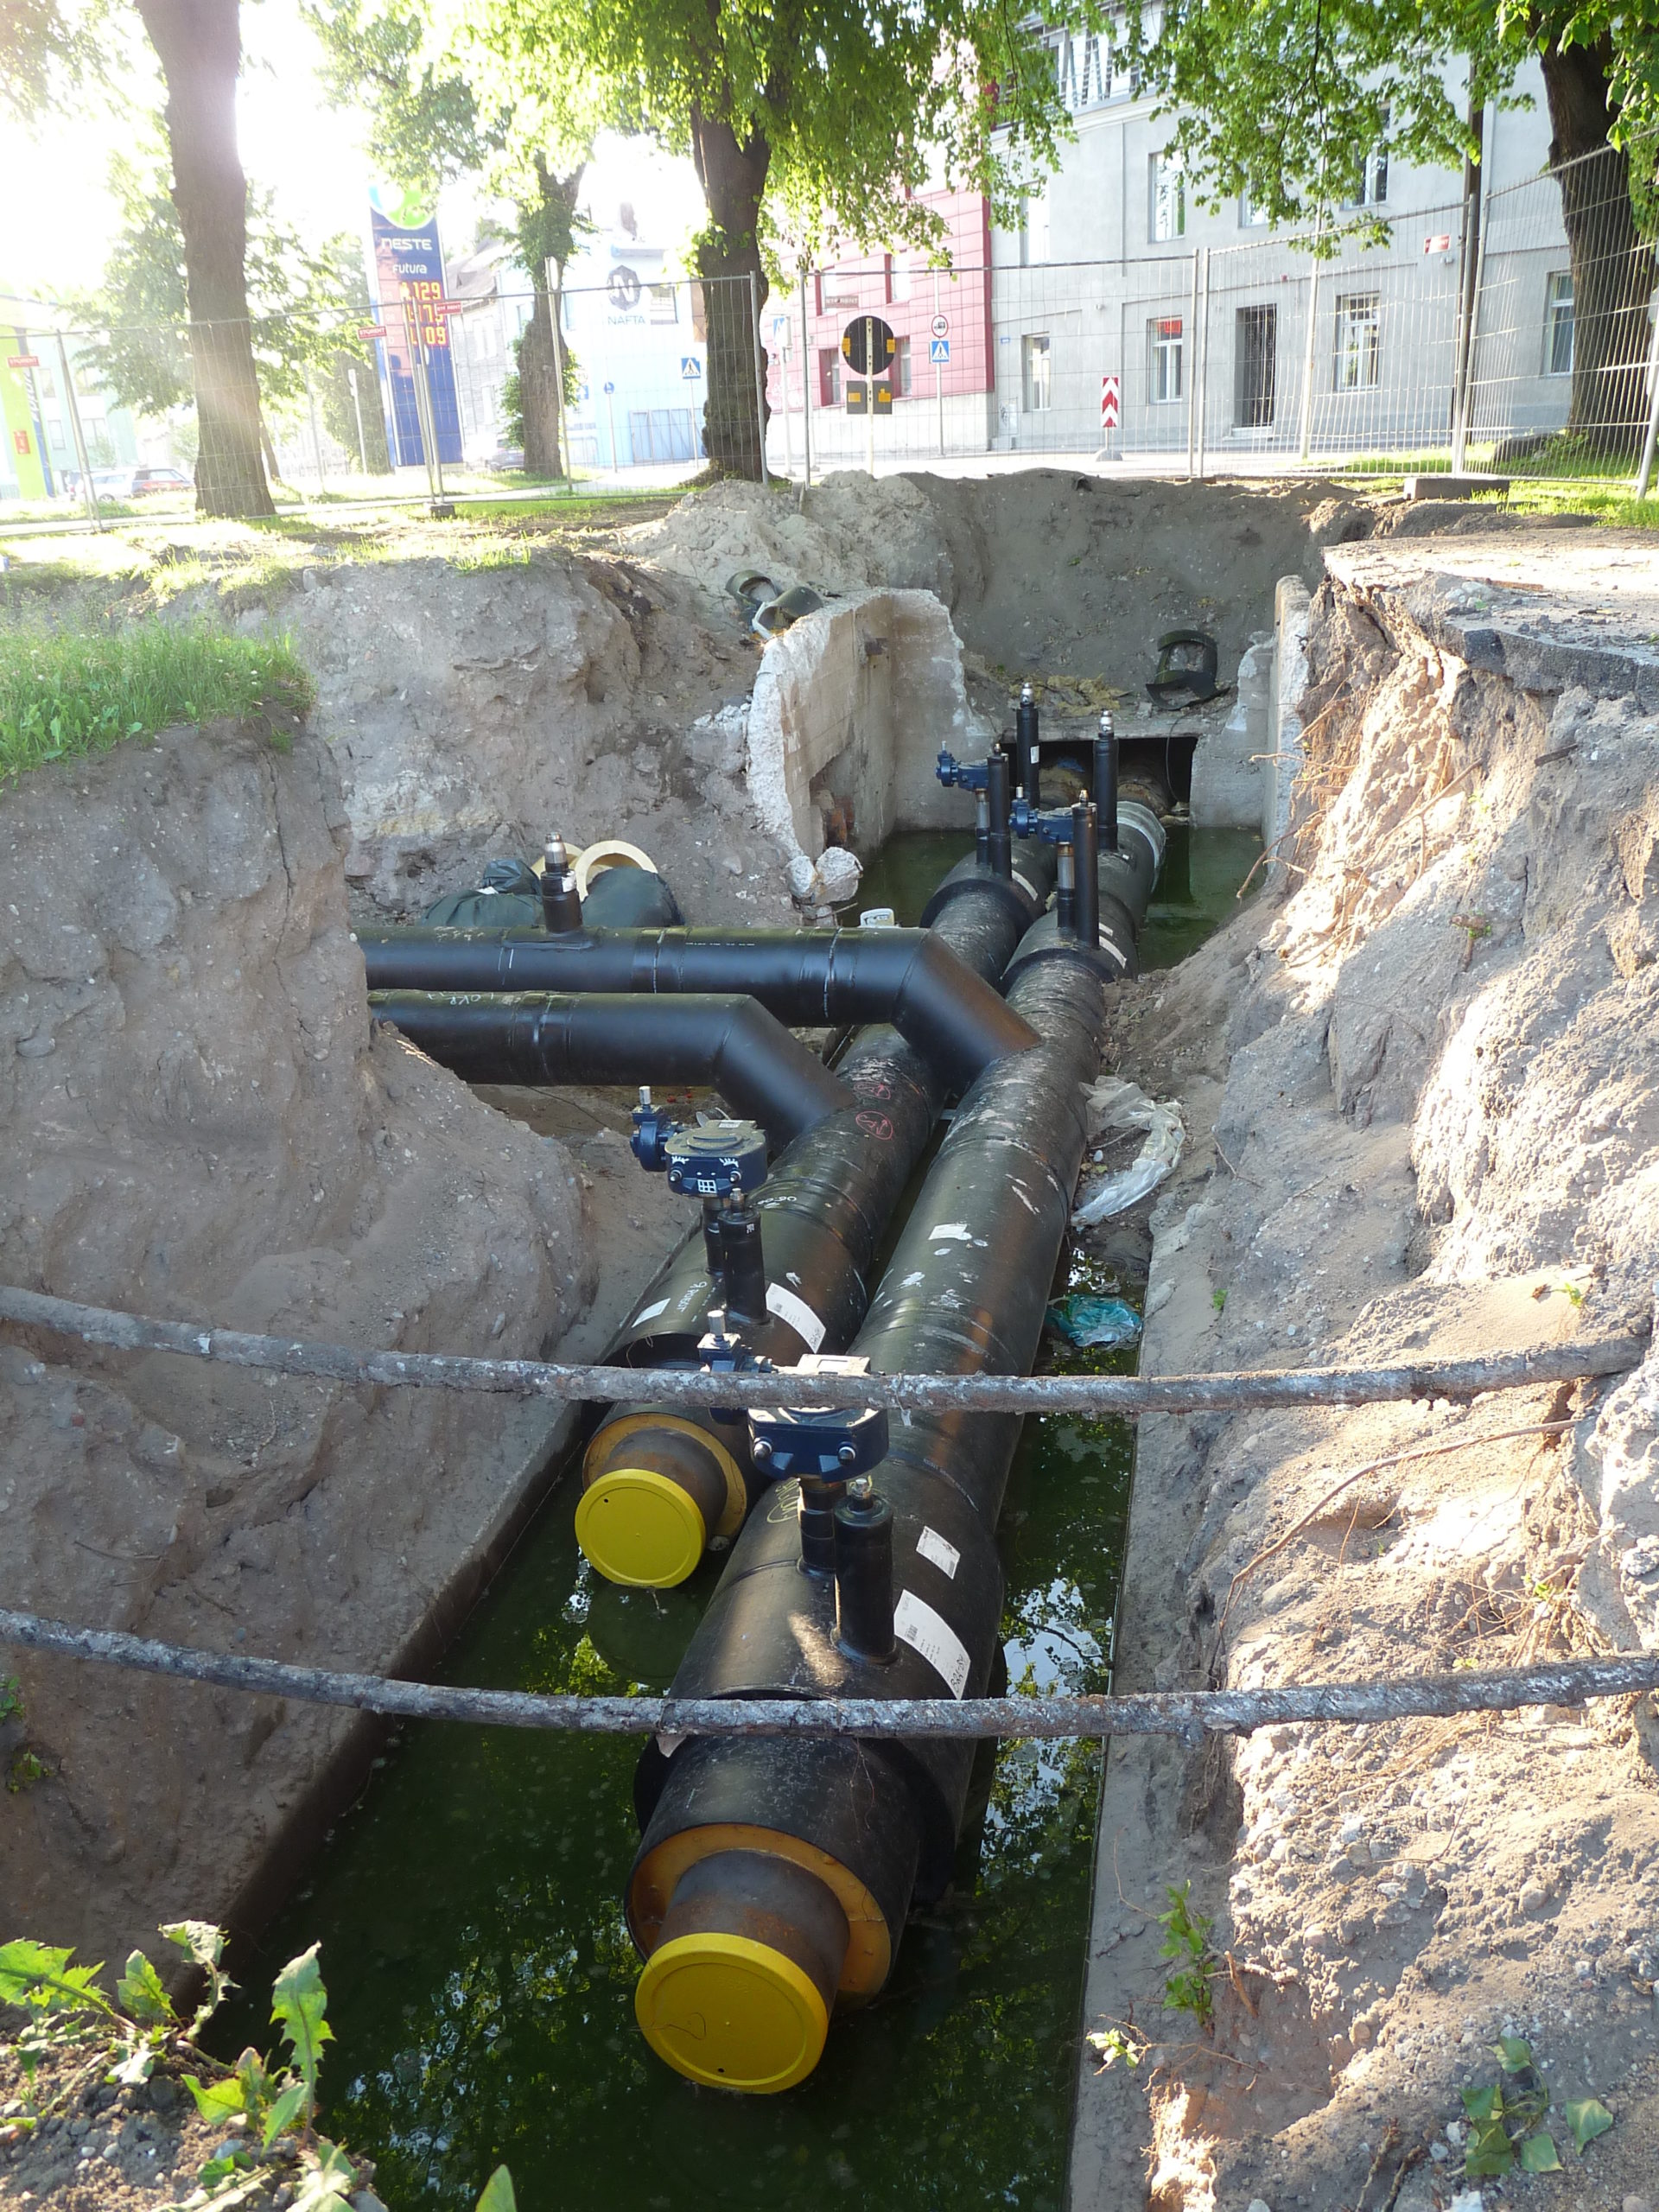 Energy: District heating pipes. <em><strong>Picture by Dmitry G</strong></em>”/><span
class=